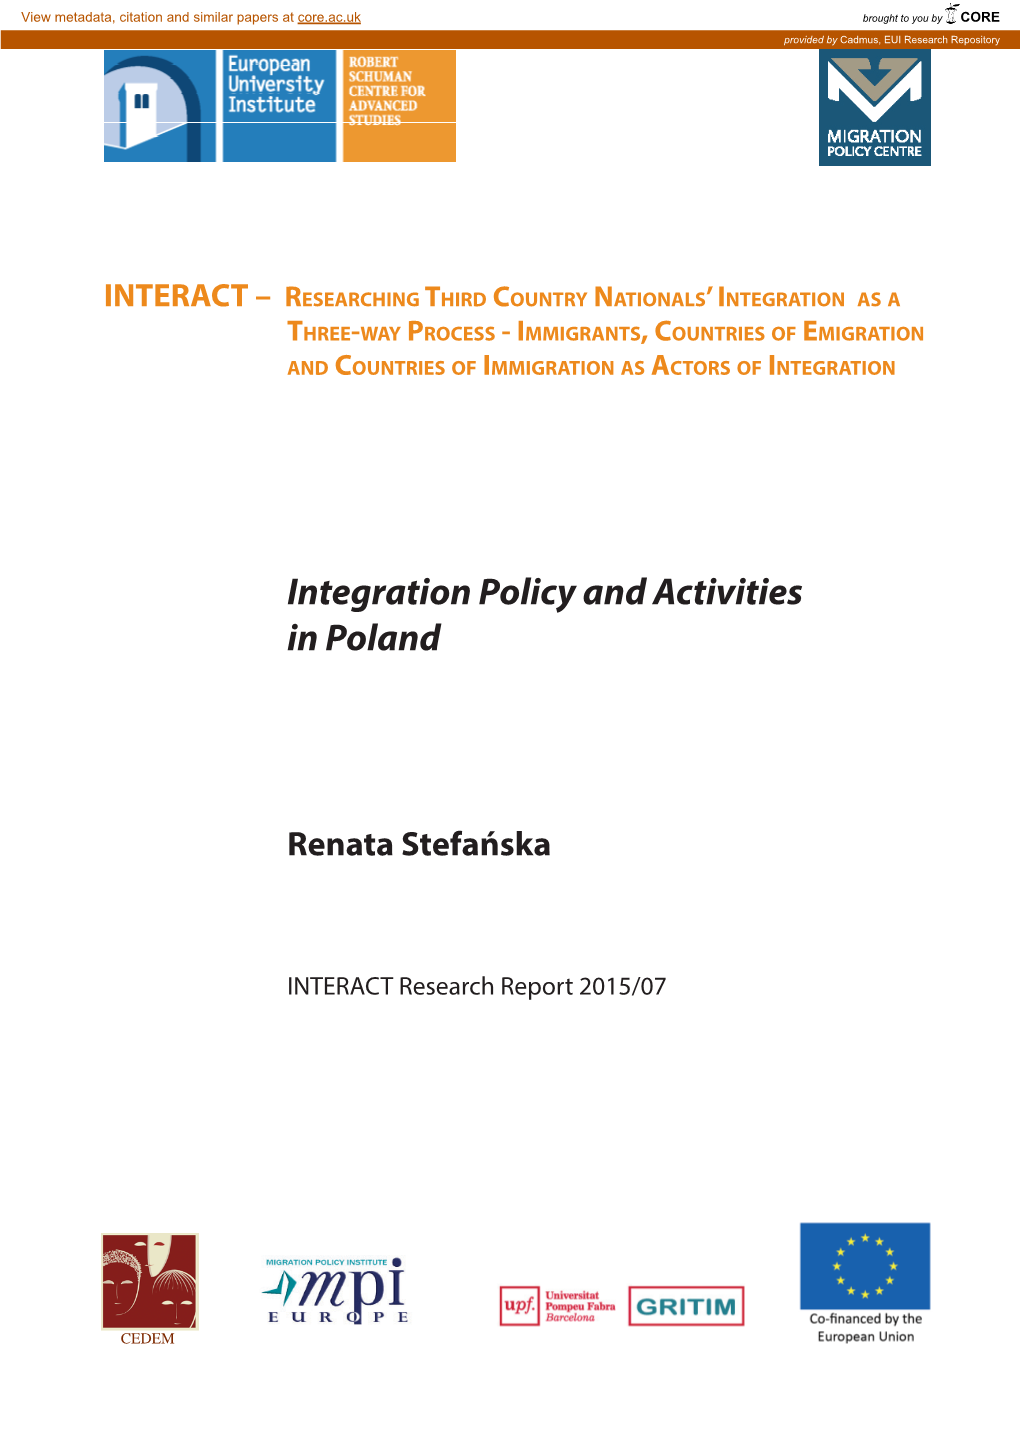 Integration Policy and Activities in Poland